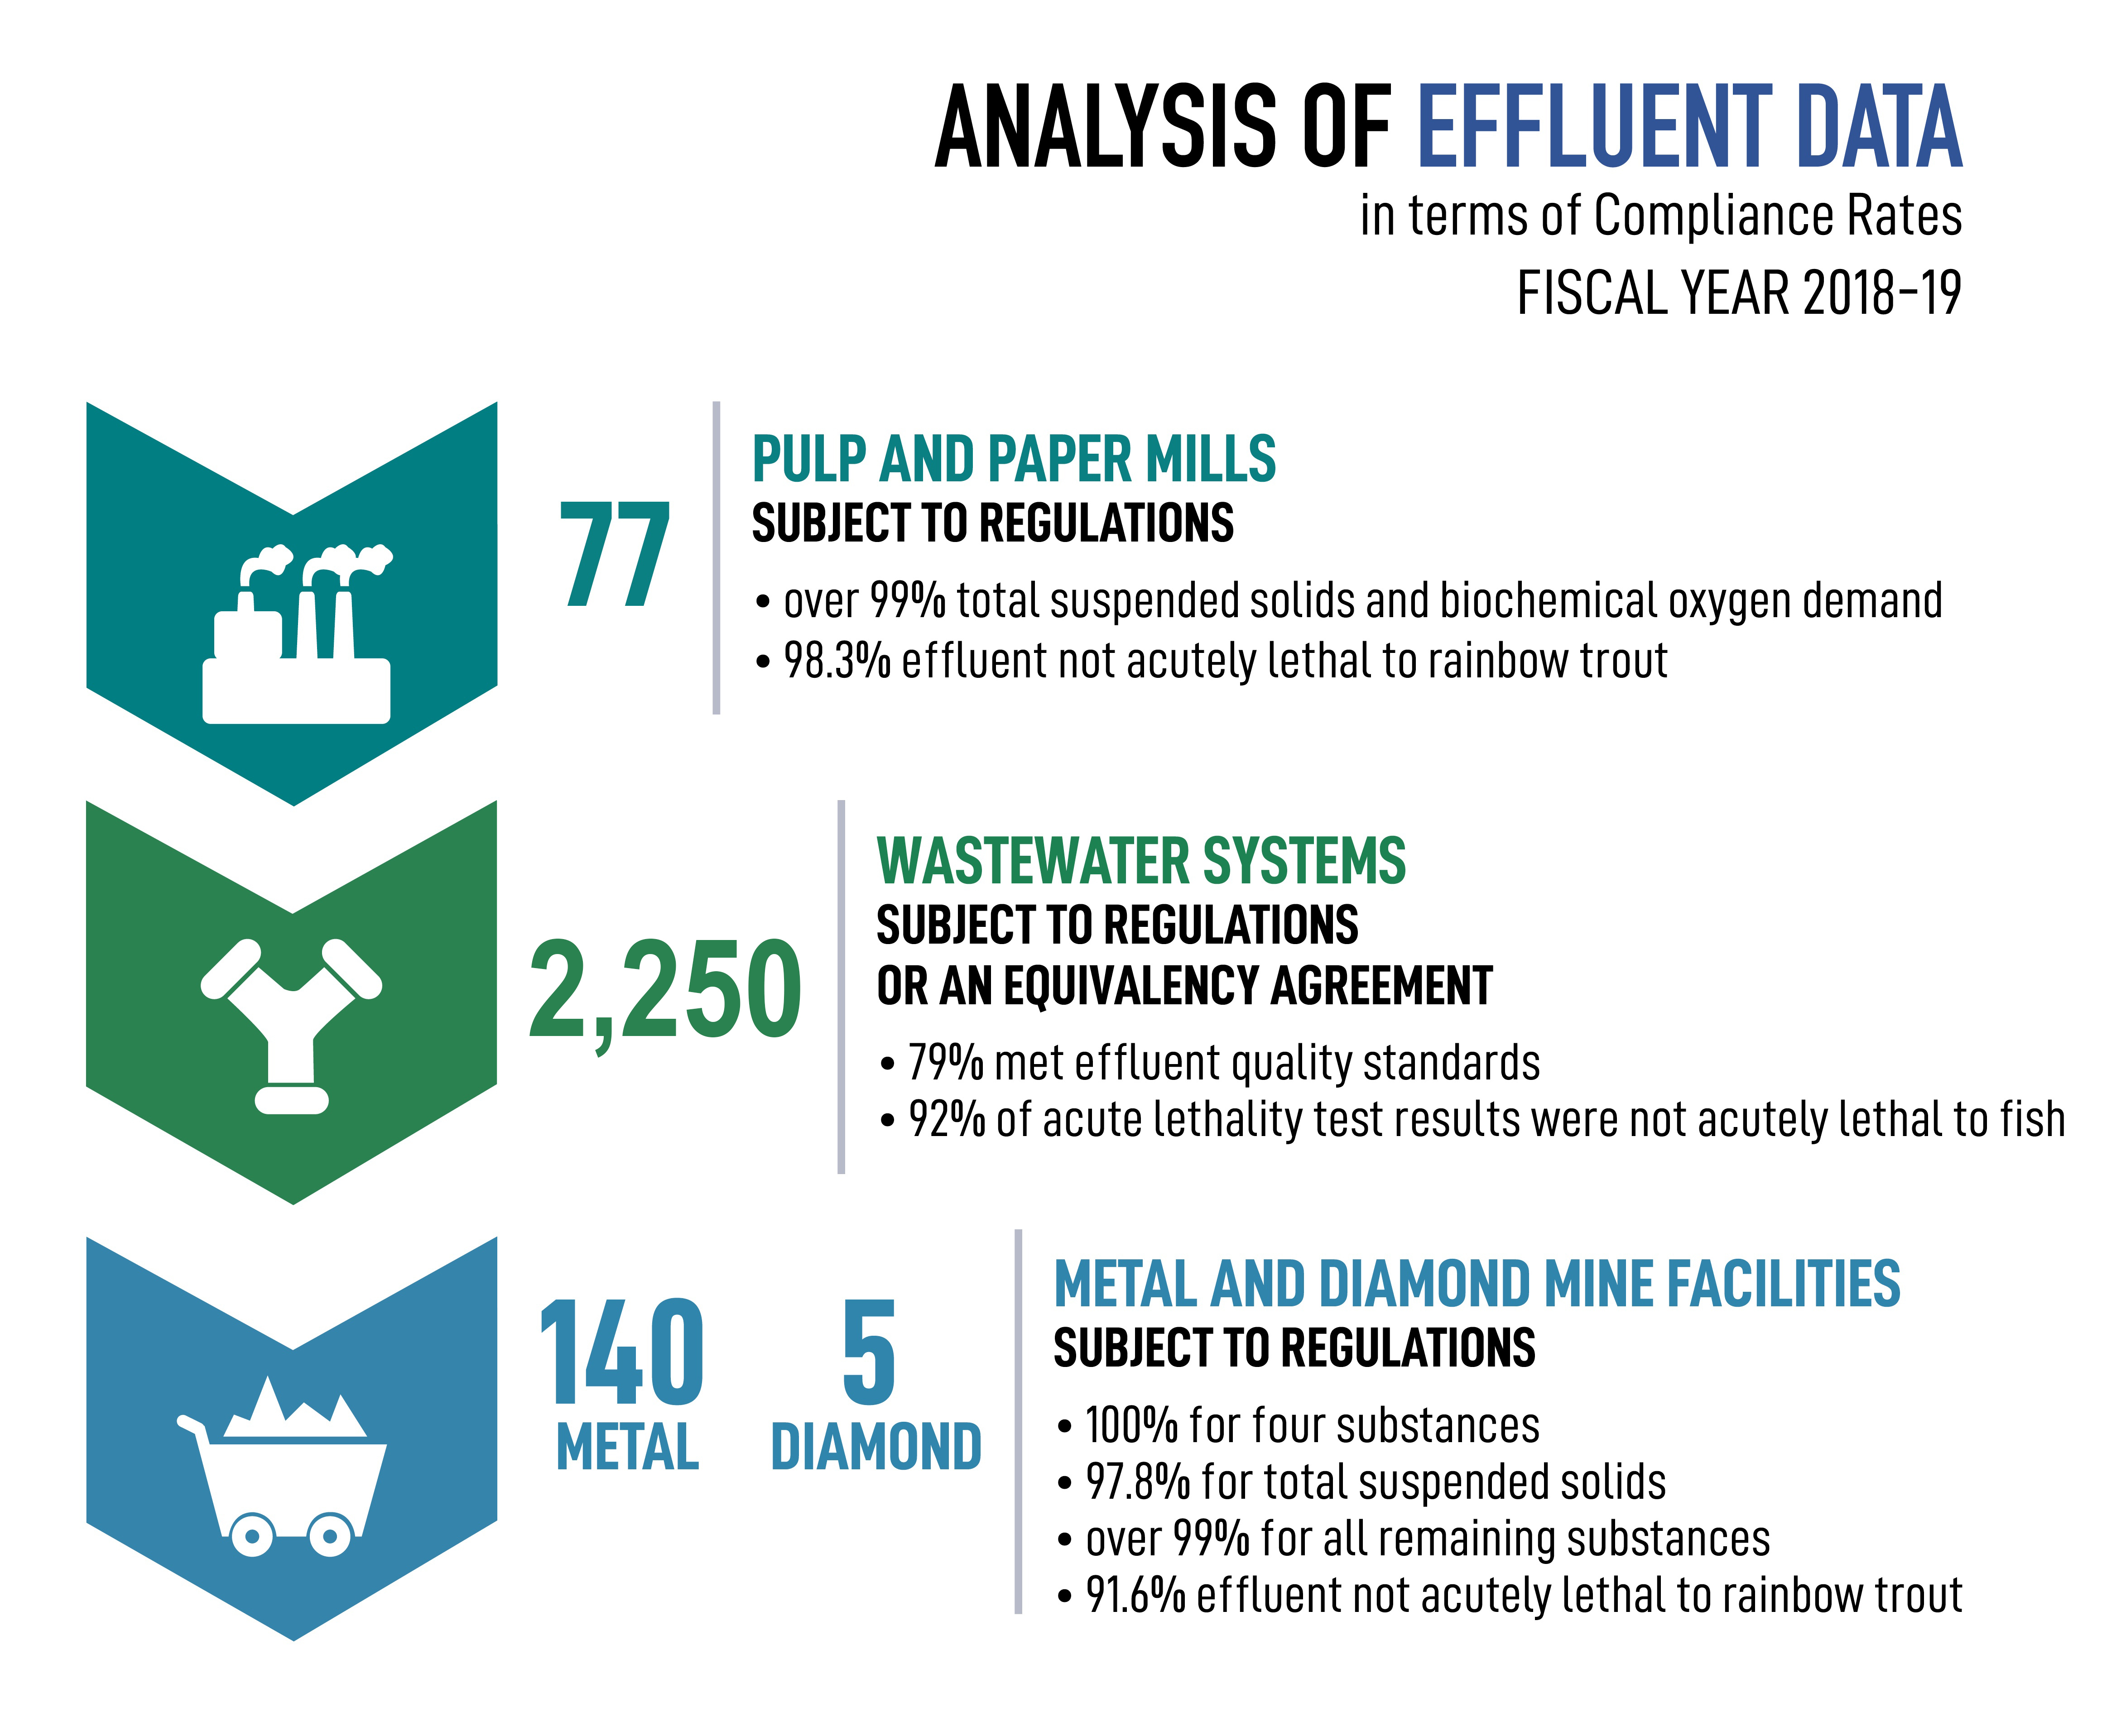 Infographic showing the effluent data reported by facilities under Fisheries Act regulations, as described in section 3.4.